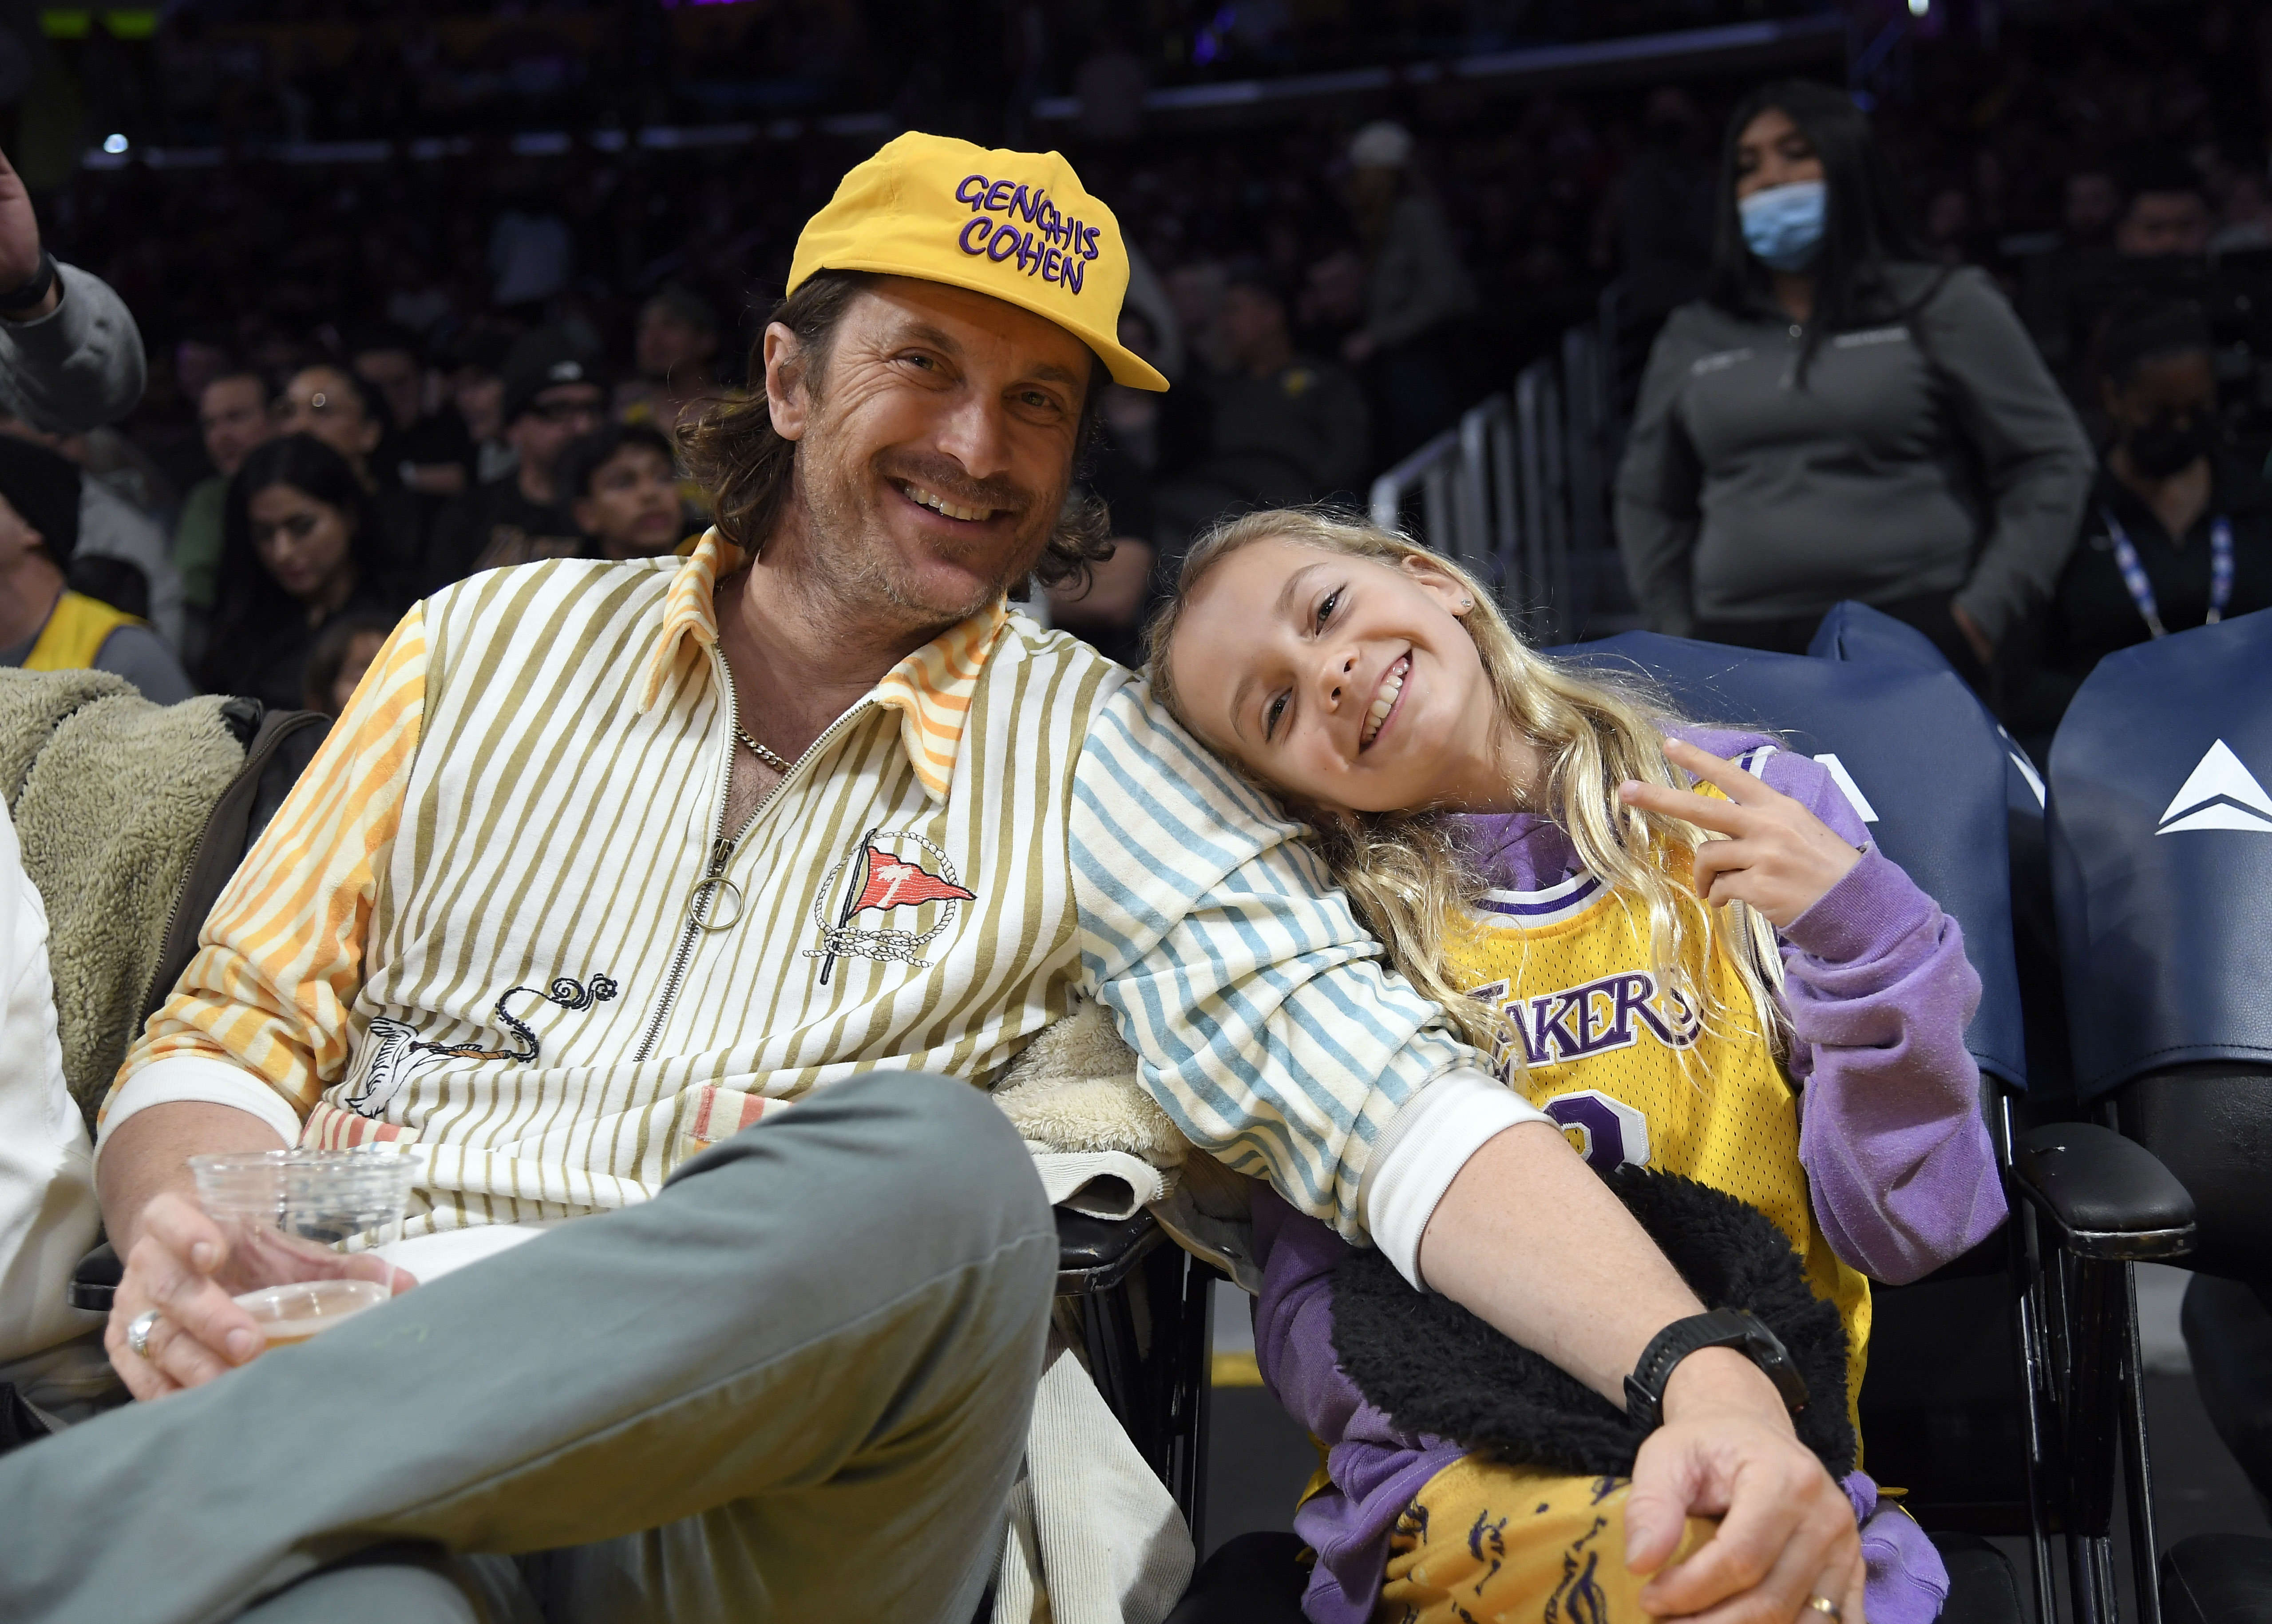 Oliver Hudson and his daughter Rio attend a Lakers vs. Raptors game at Crypto.com Arena in Los Angeles, California on March 10, 2023. | Source: Getty Images